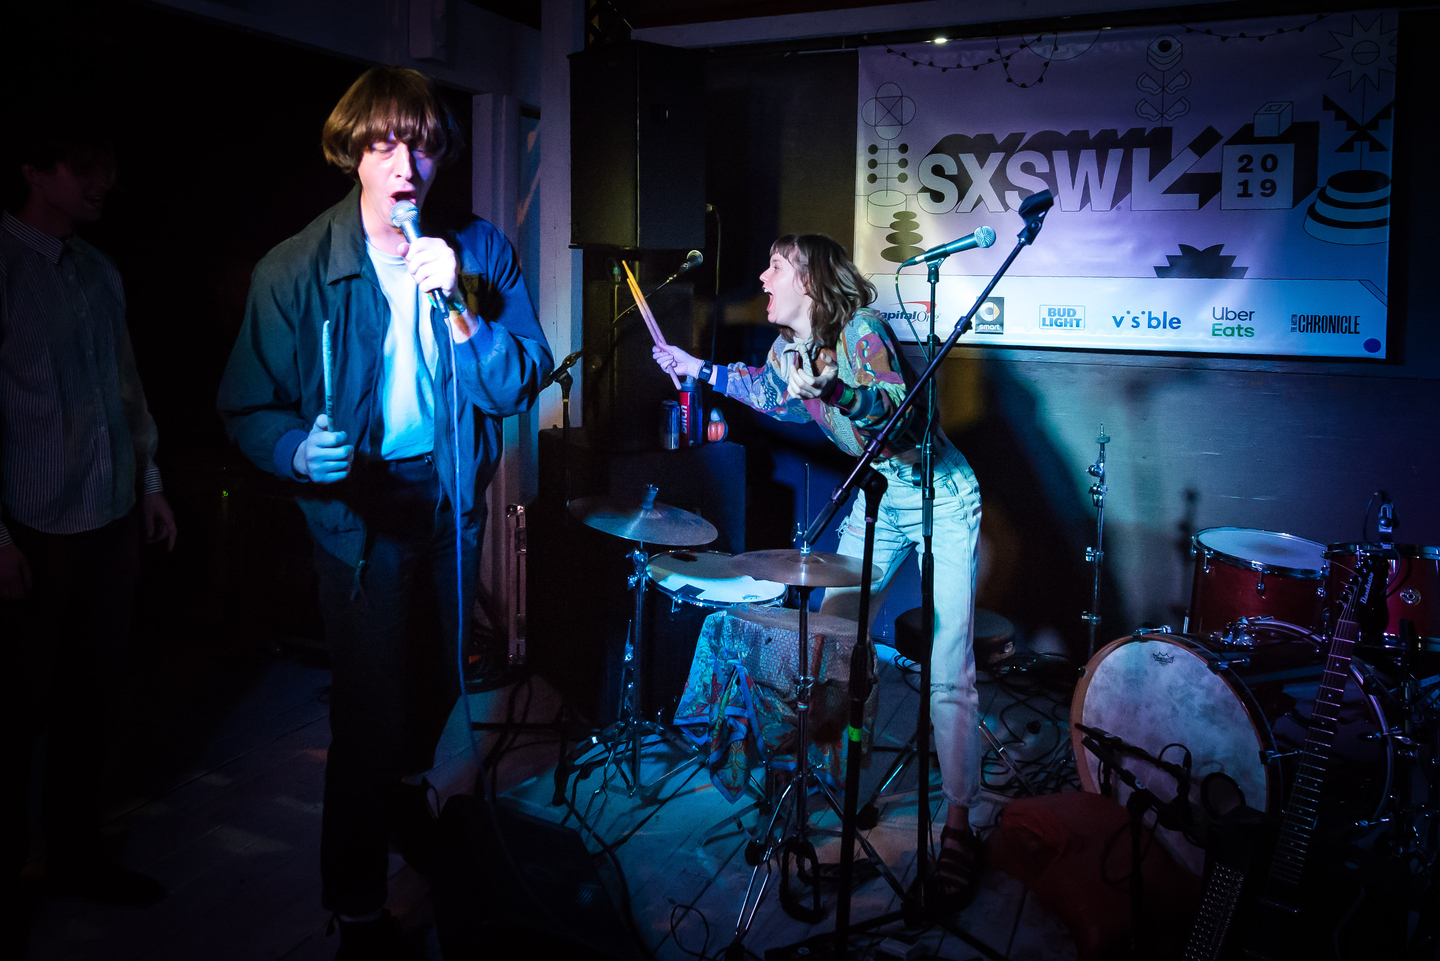 Being Dead at 720 Club Patio, presented by SXSW: In The Garage – Photo by Joe Cavazos